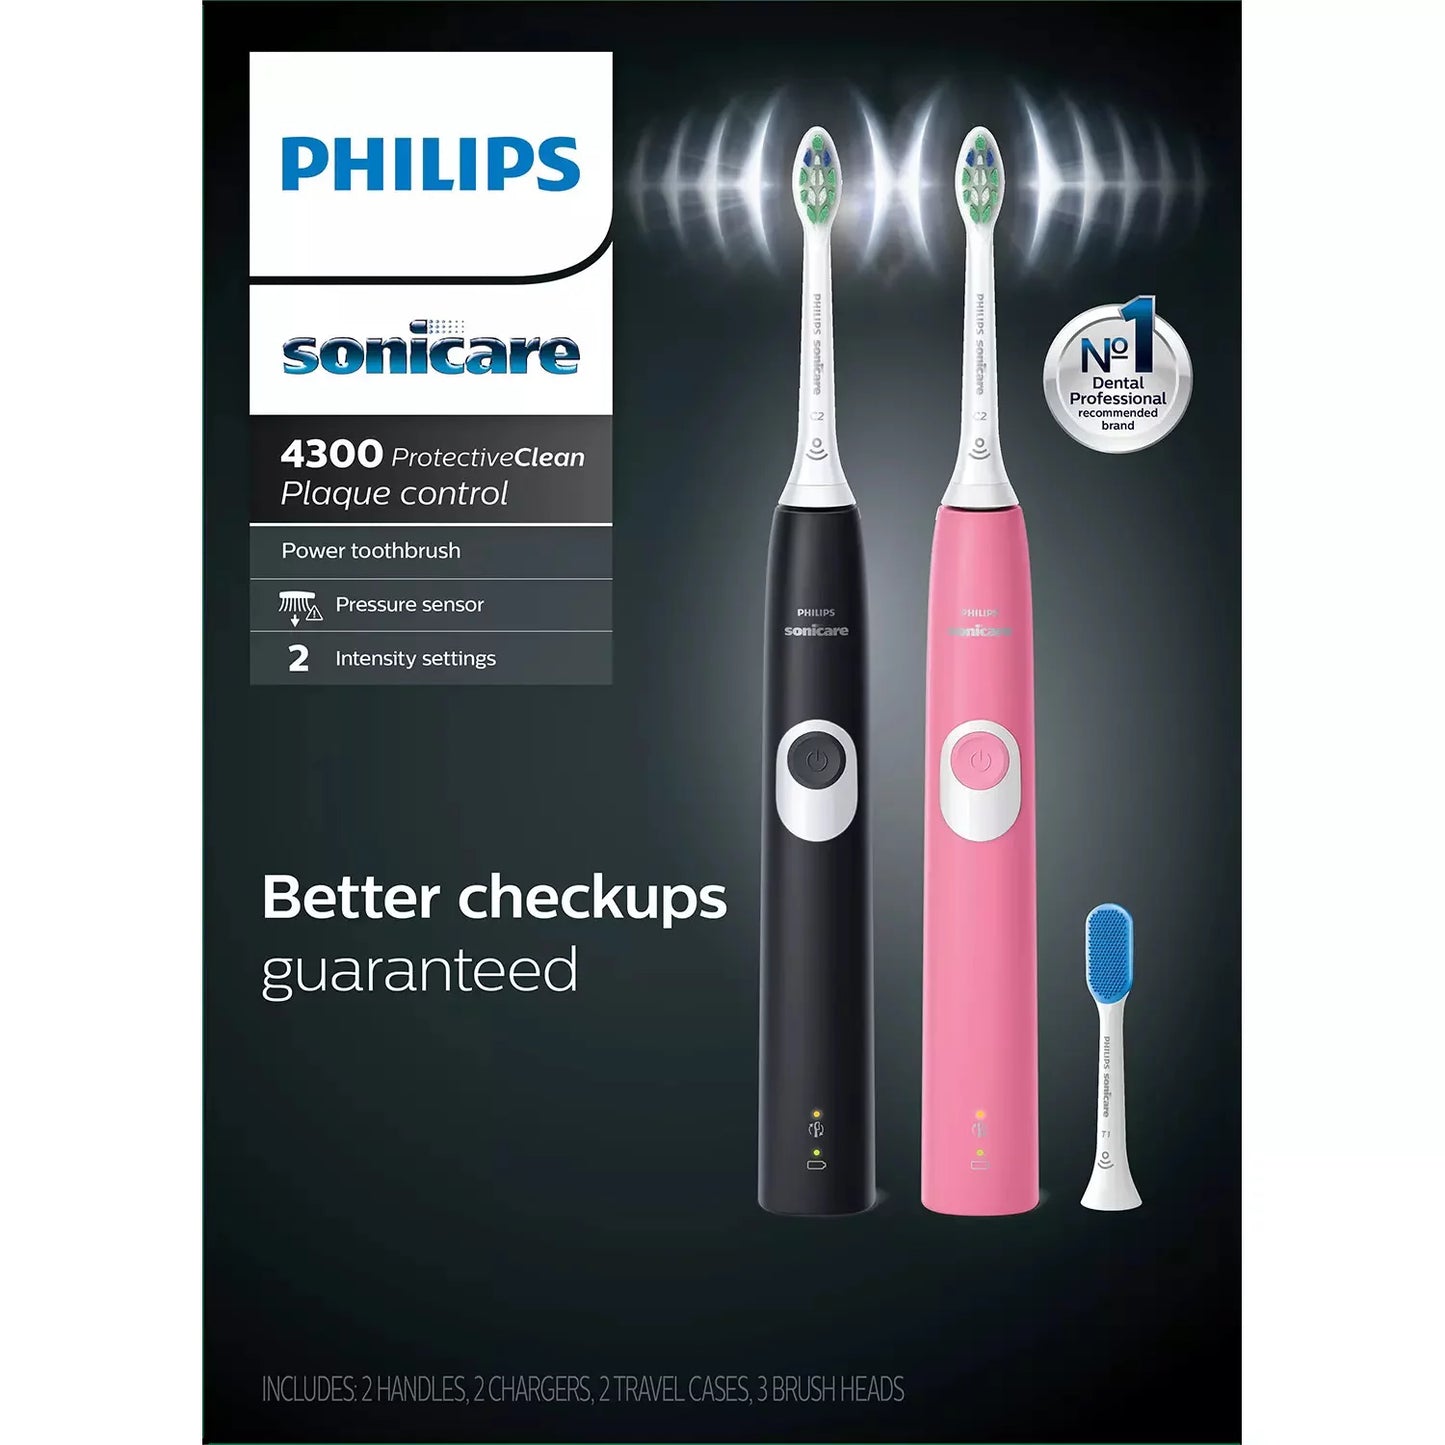 Philips Sonicare ProtectiveClean 4300 Rechargeable Toothbrush, 2 pk (Pink, Black)